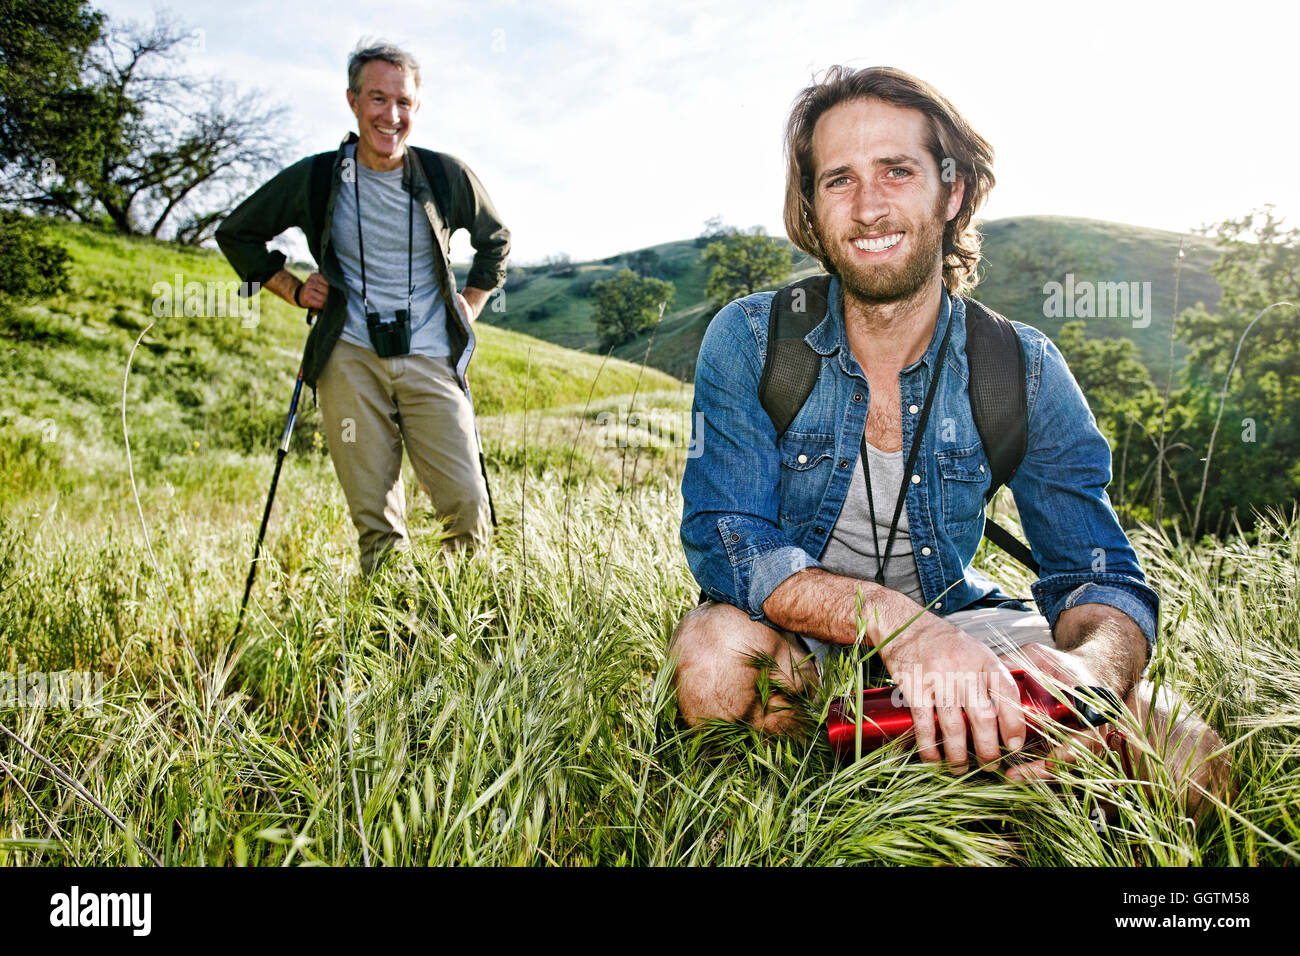 Caucasian hikers resting in grass on mountain Stock Photo